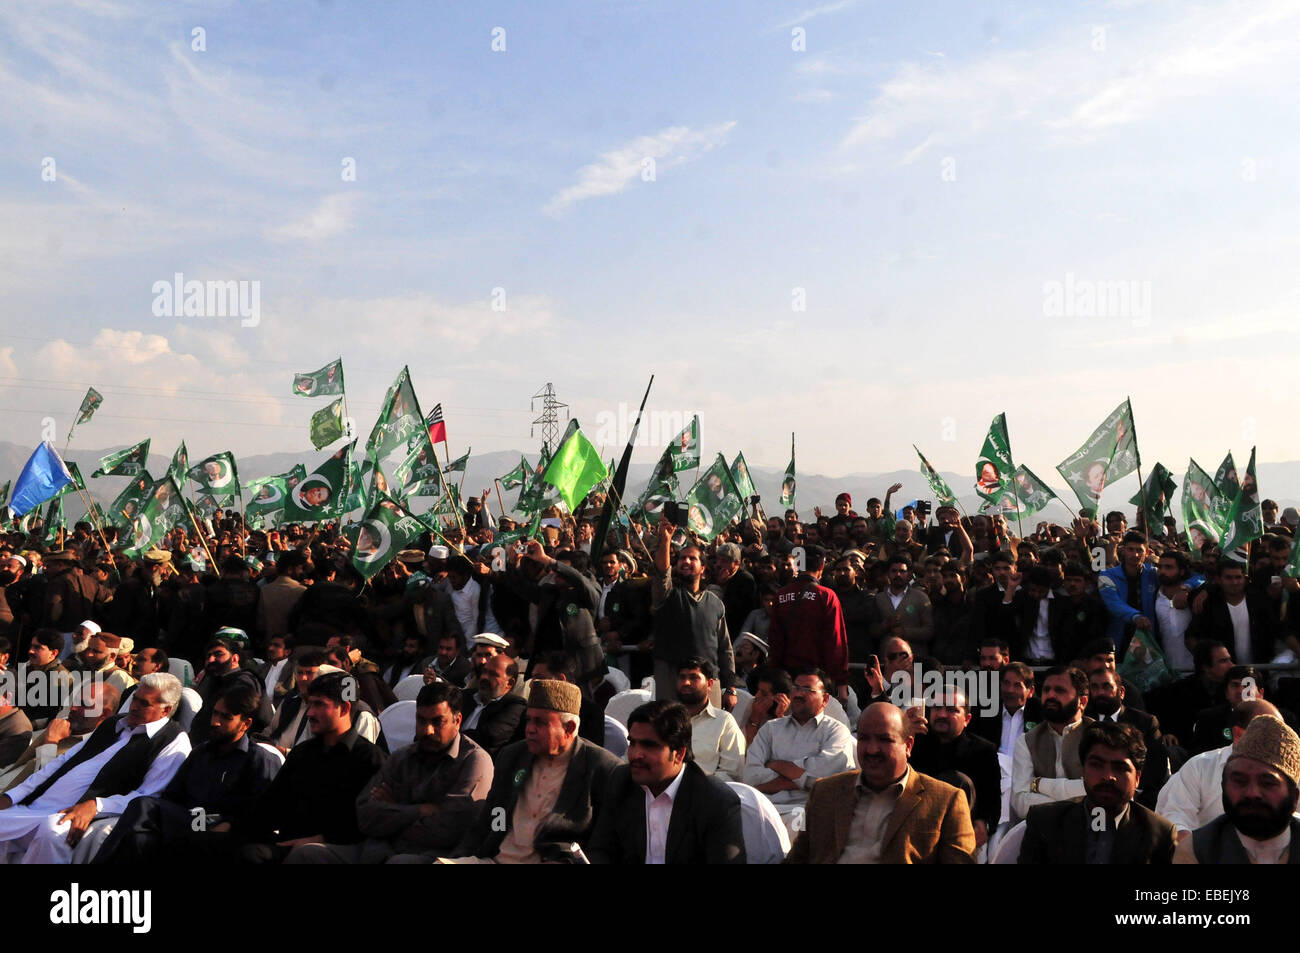 Havelian. 29th Nov, 2014. Supporters of ruling party Pakistan Muslim League-Nawaz (PML-N) gathered during a public meeting in northwest Pakistan's Havelian on Nov. 29, 2014. Pakistani Prime Minister Nawaz Sharif addressing a huge public meeting at Havelian on Saturday said that the multi-dimensional projects being undertaken by PML-N government would make Pakistan an Asian tiger. Credit:  Ahmad Kamal/Xinhua/Alamy Live News Stock Photo